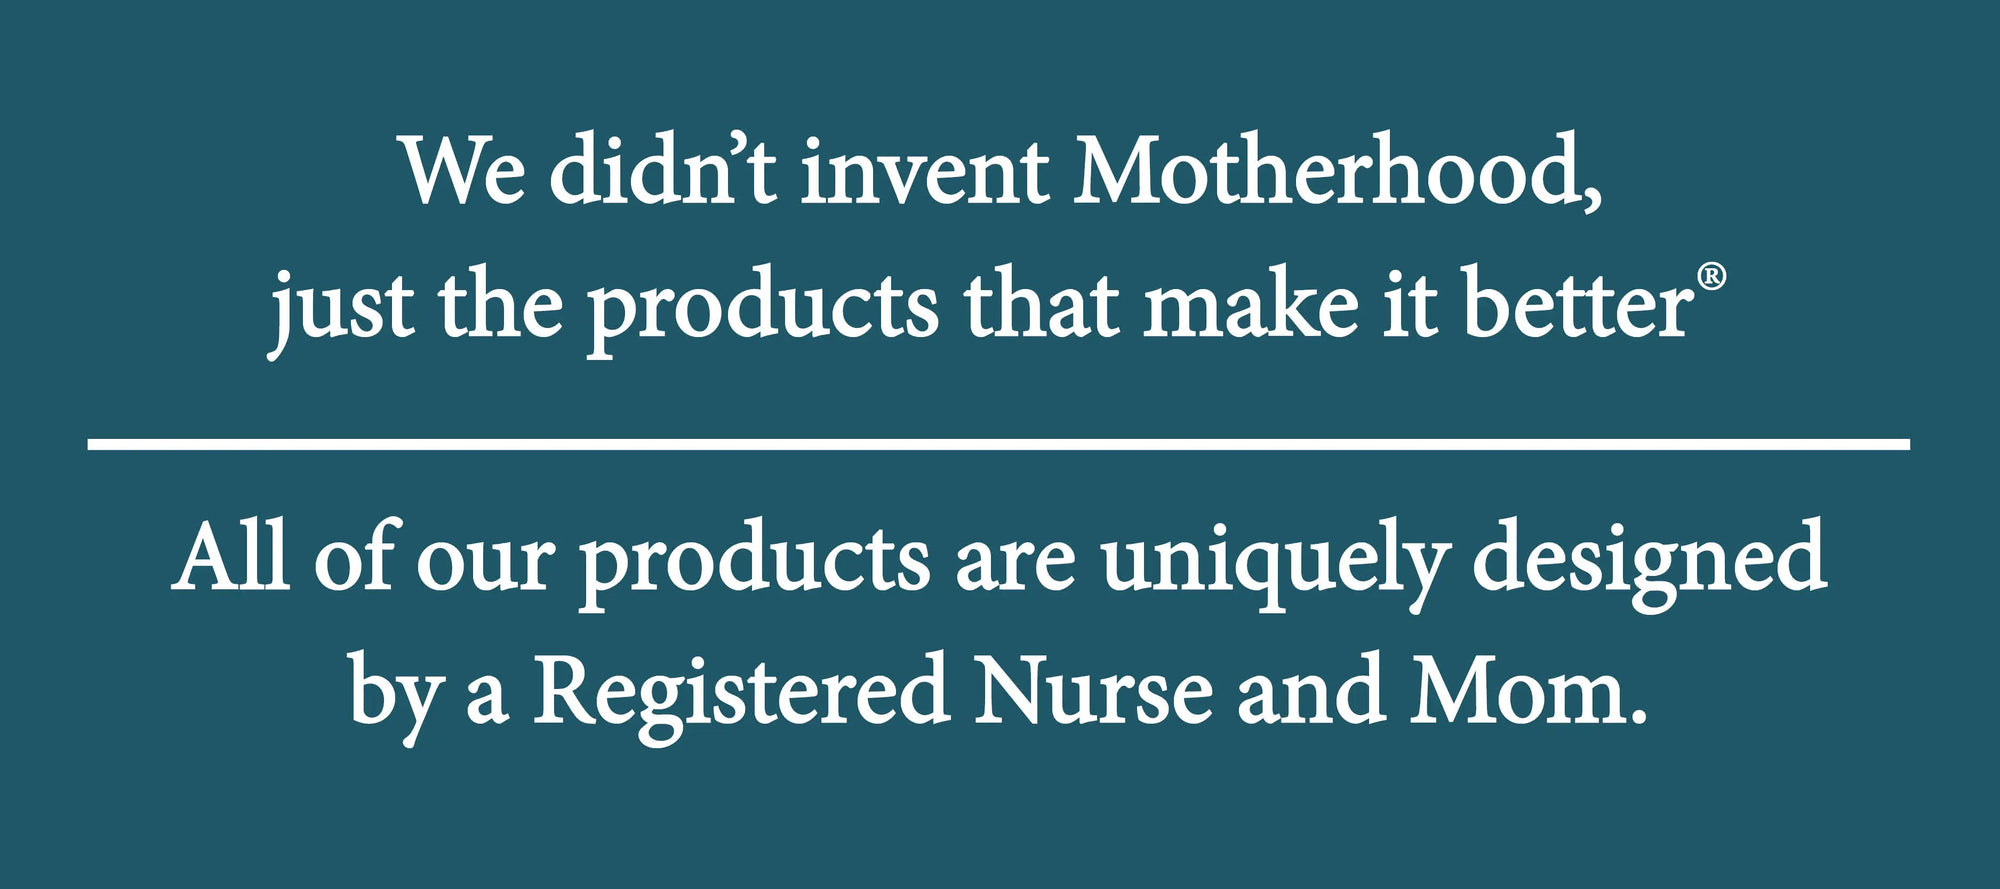 We didn't invent motherhood, just the products that make it better. All products are uniquely designed by a Registered Nurse and Mom.